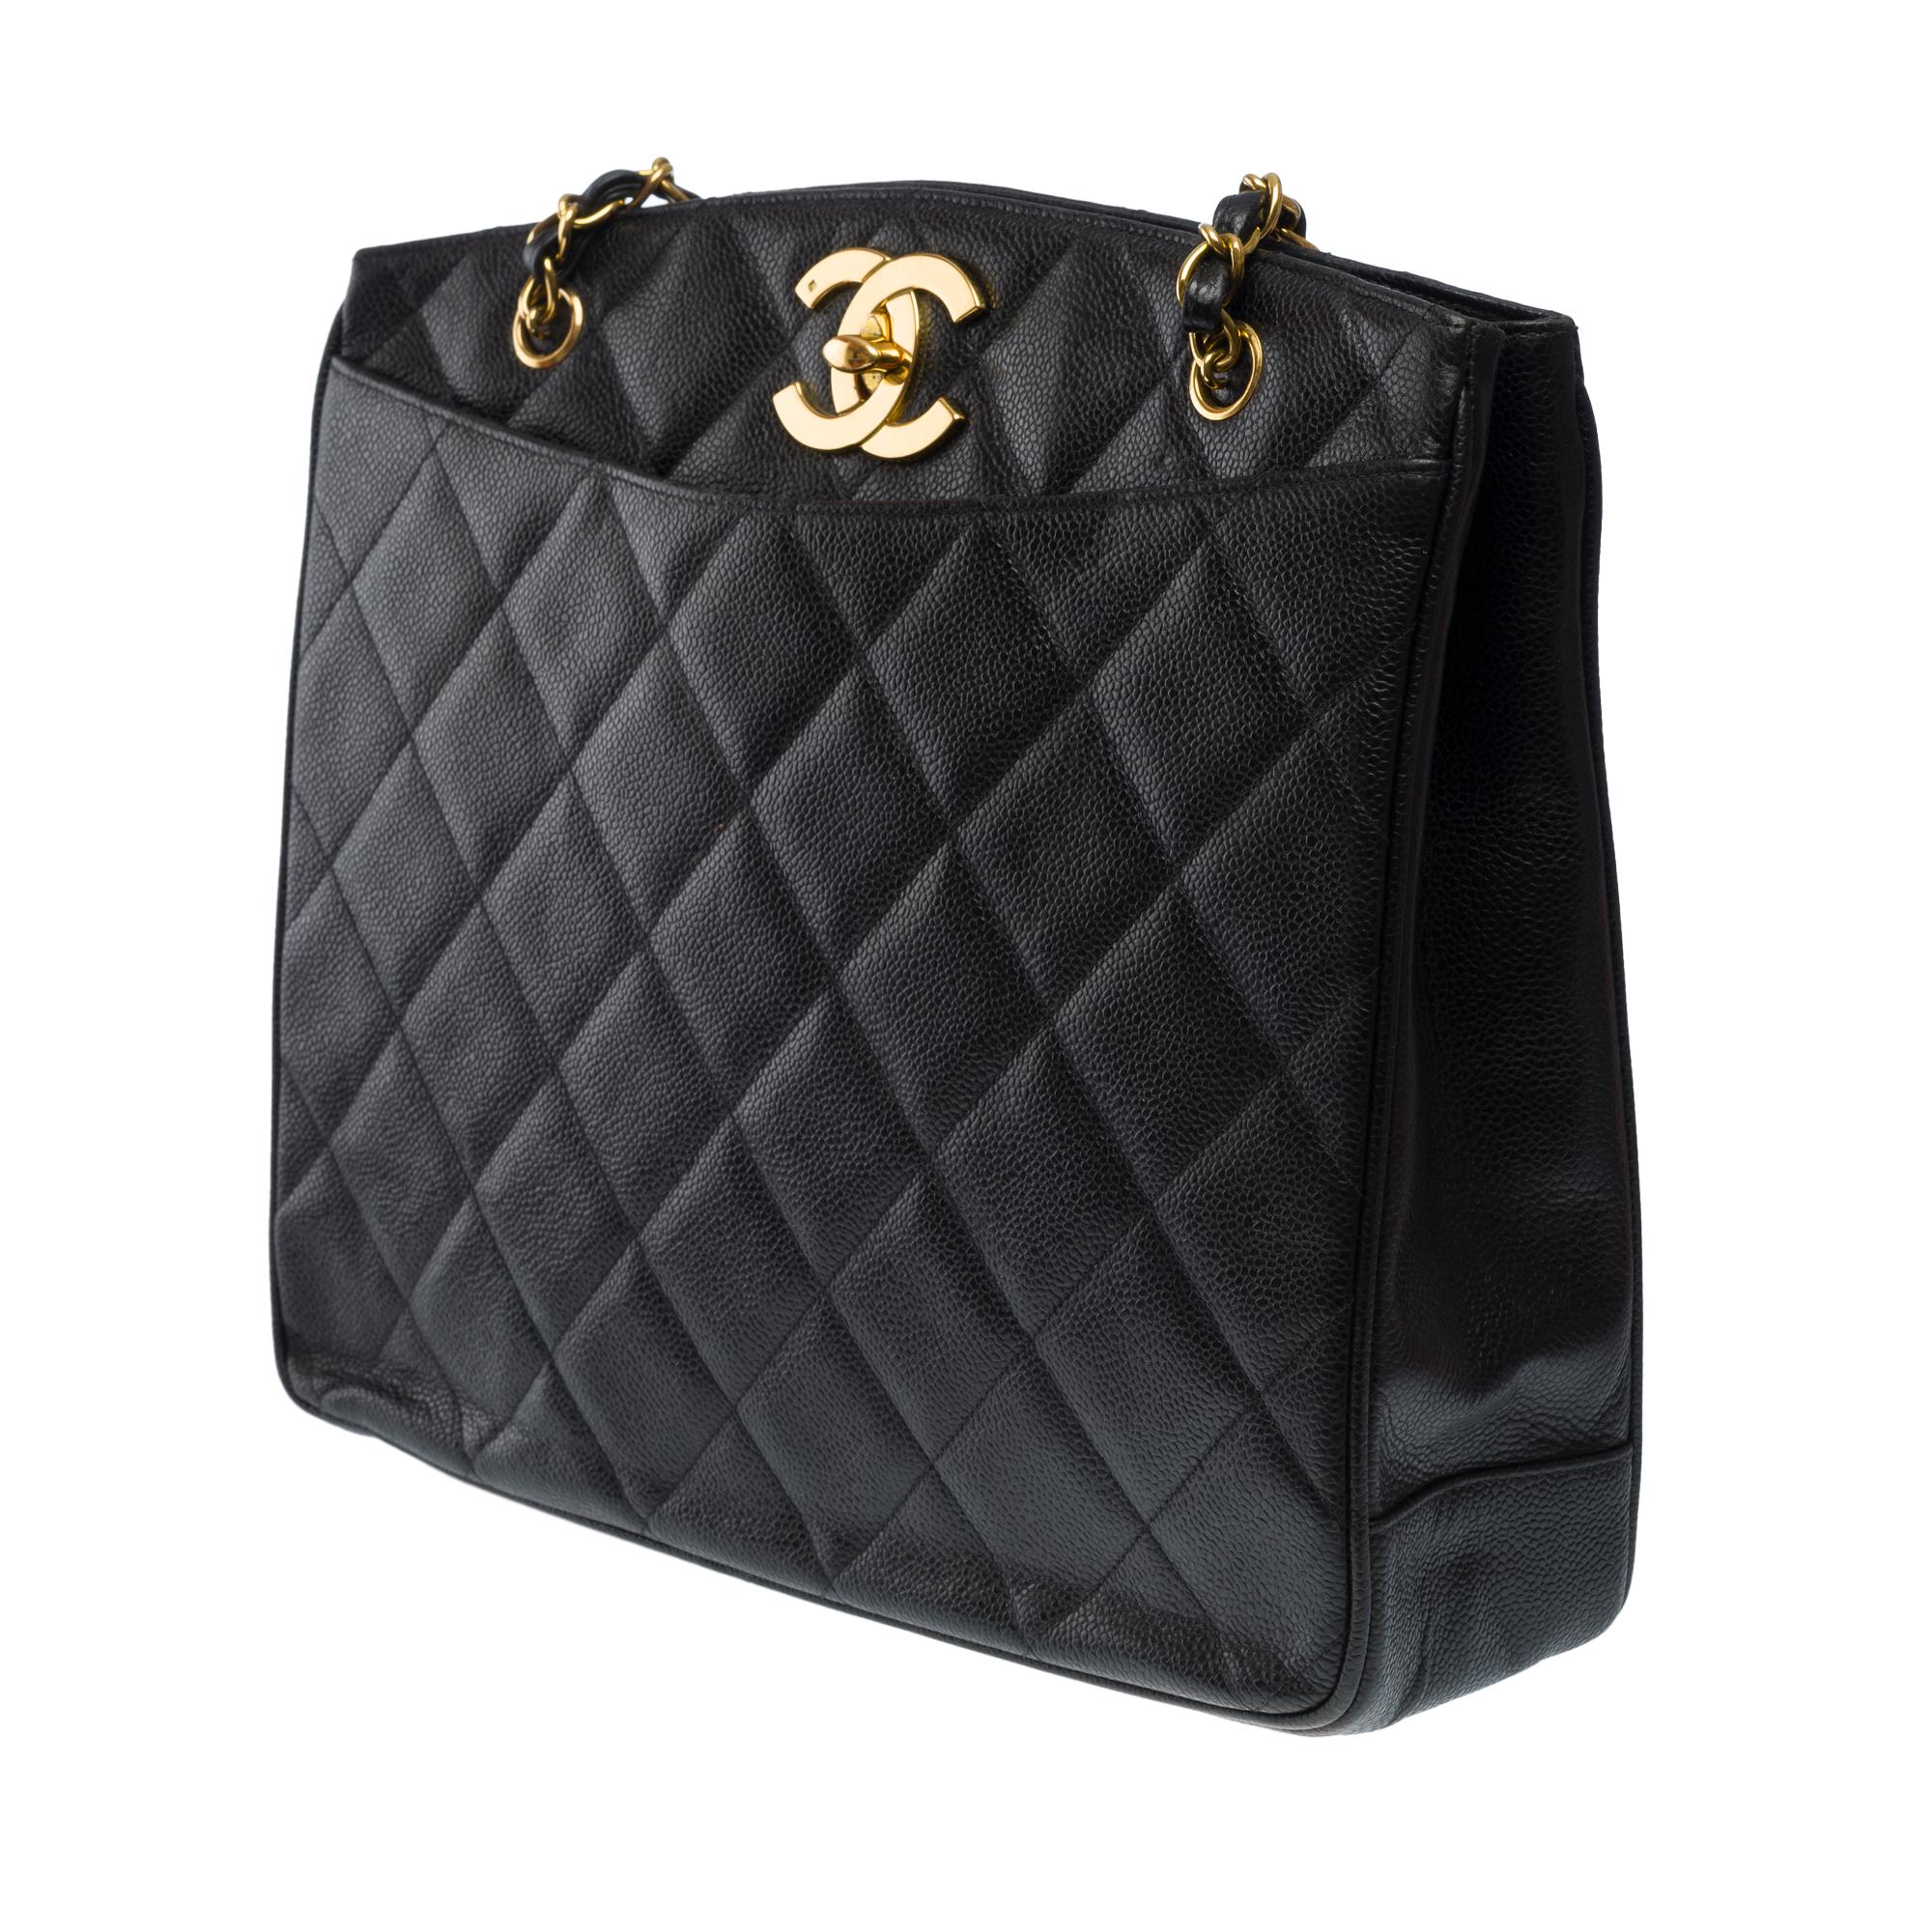 Women's Amazing Chanel Shopping Tote bag in black Caviar quilted leather, GHW